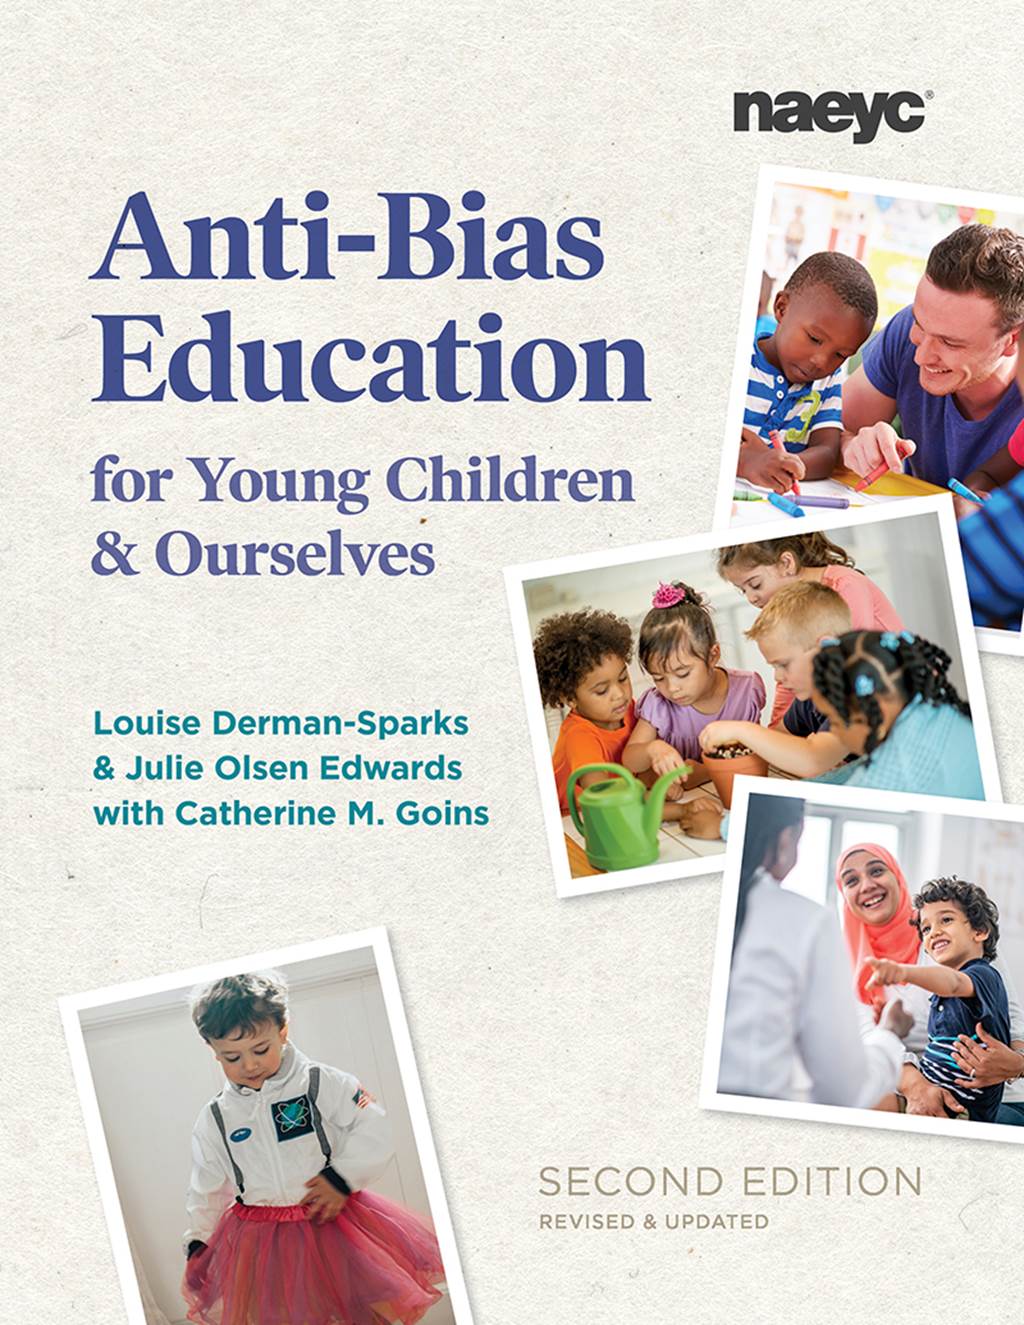 Anti-Bias Education for Young Children and Ourselves - image